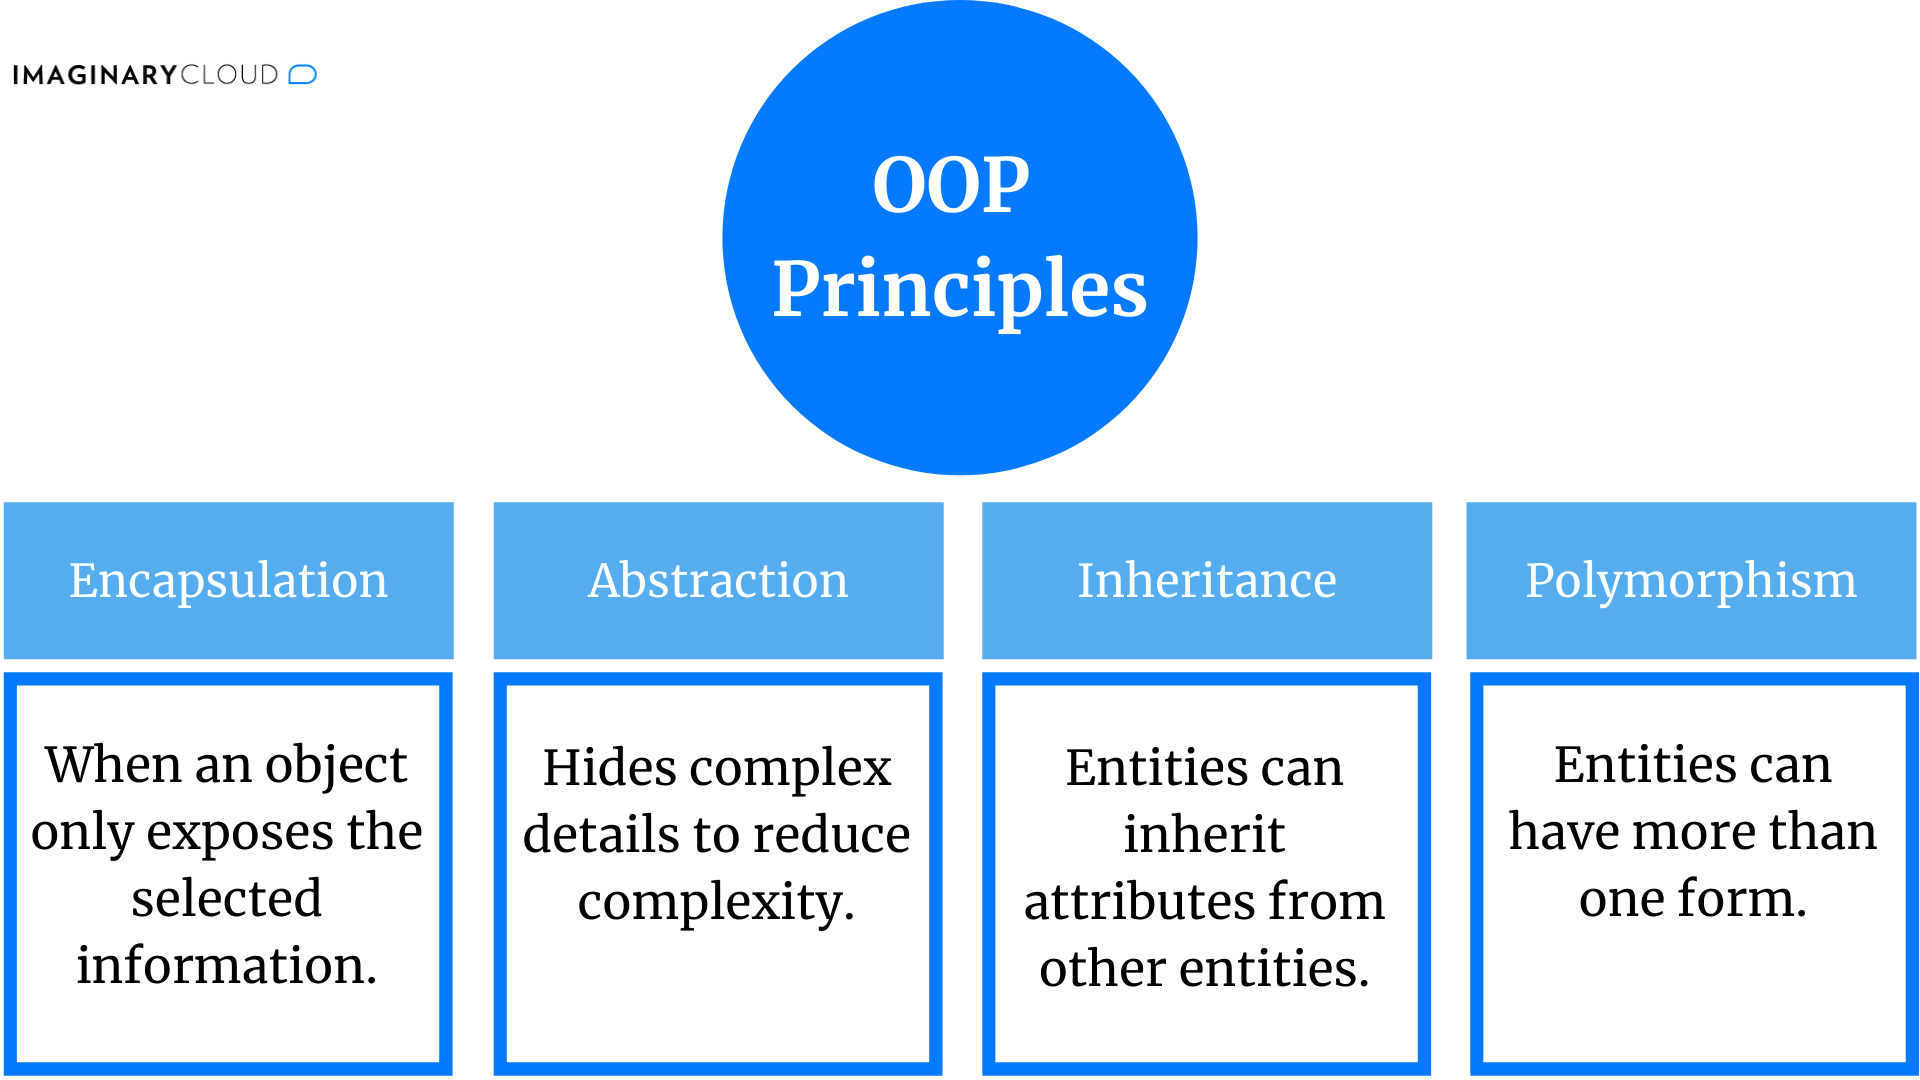 The do's and don'ts of OOP